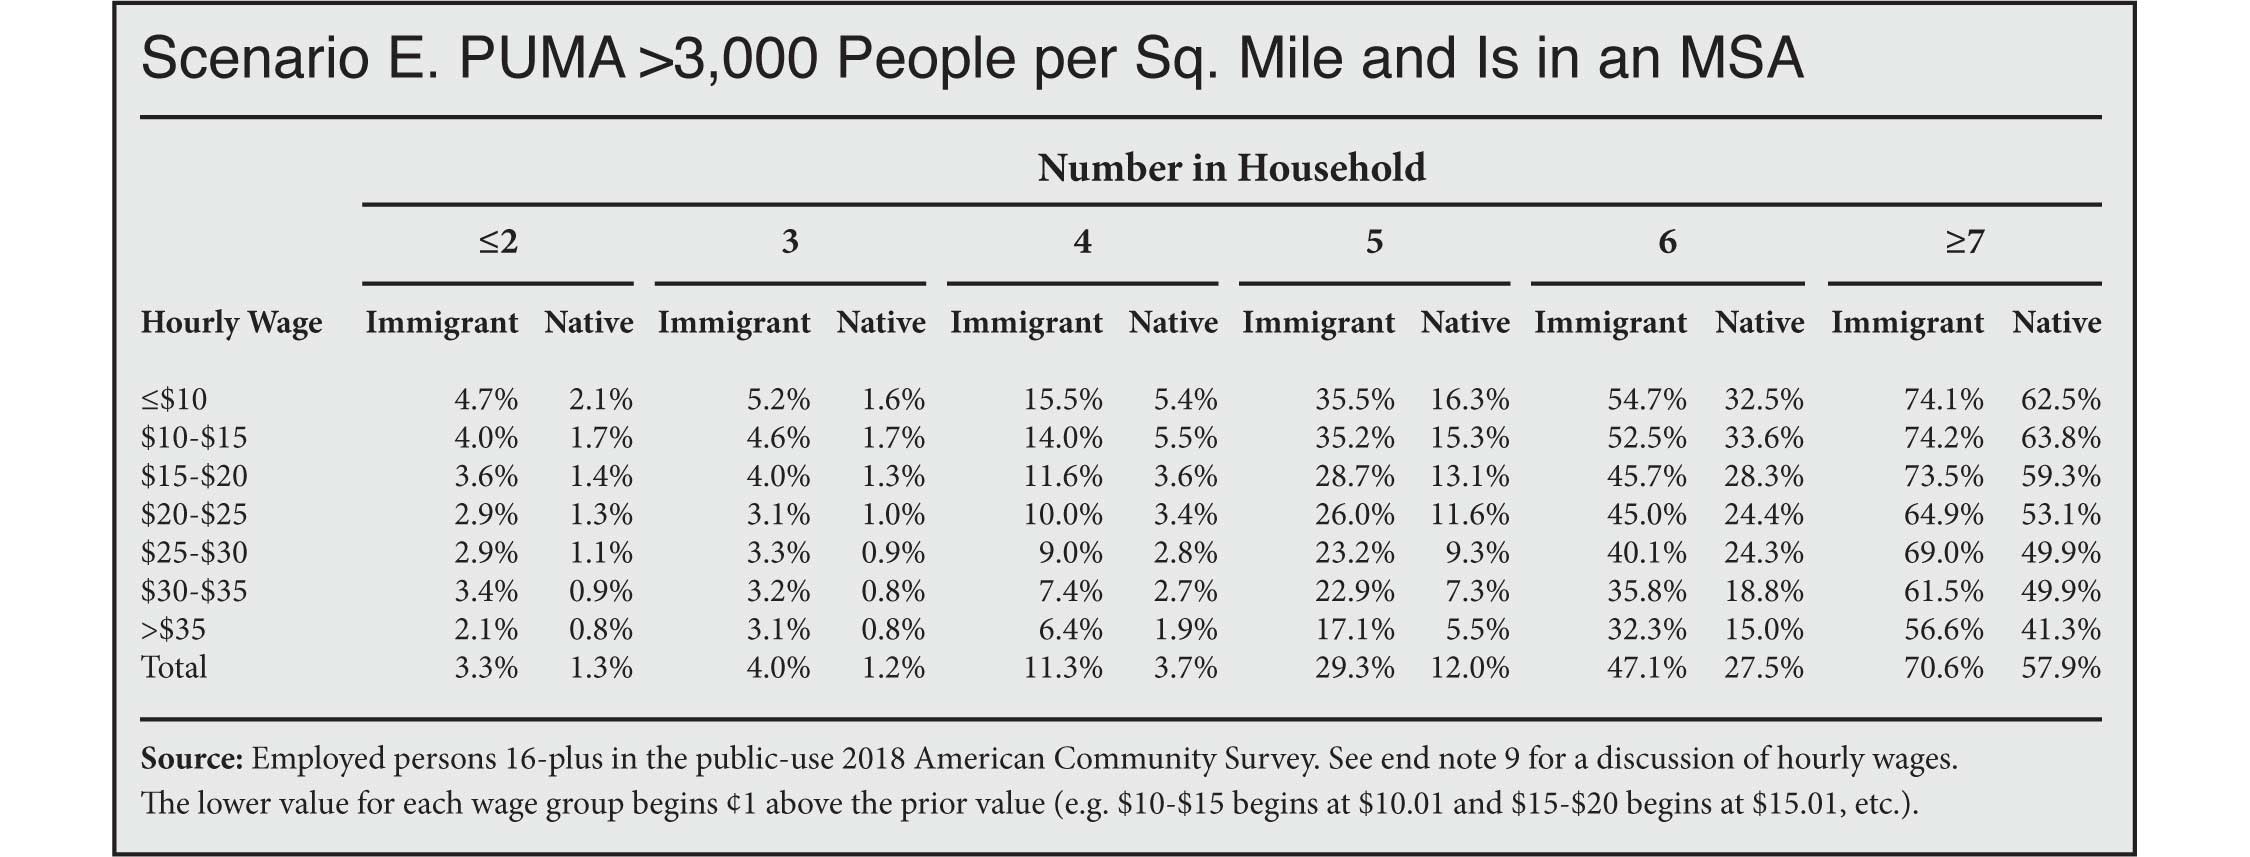 Table: Overcrowding for Immigrant and Native-Born Workers by Wage, Household Size and Population Density, PUMA >3000 people per square mile and is in a MSA